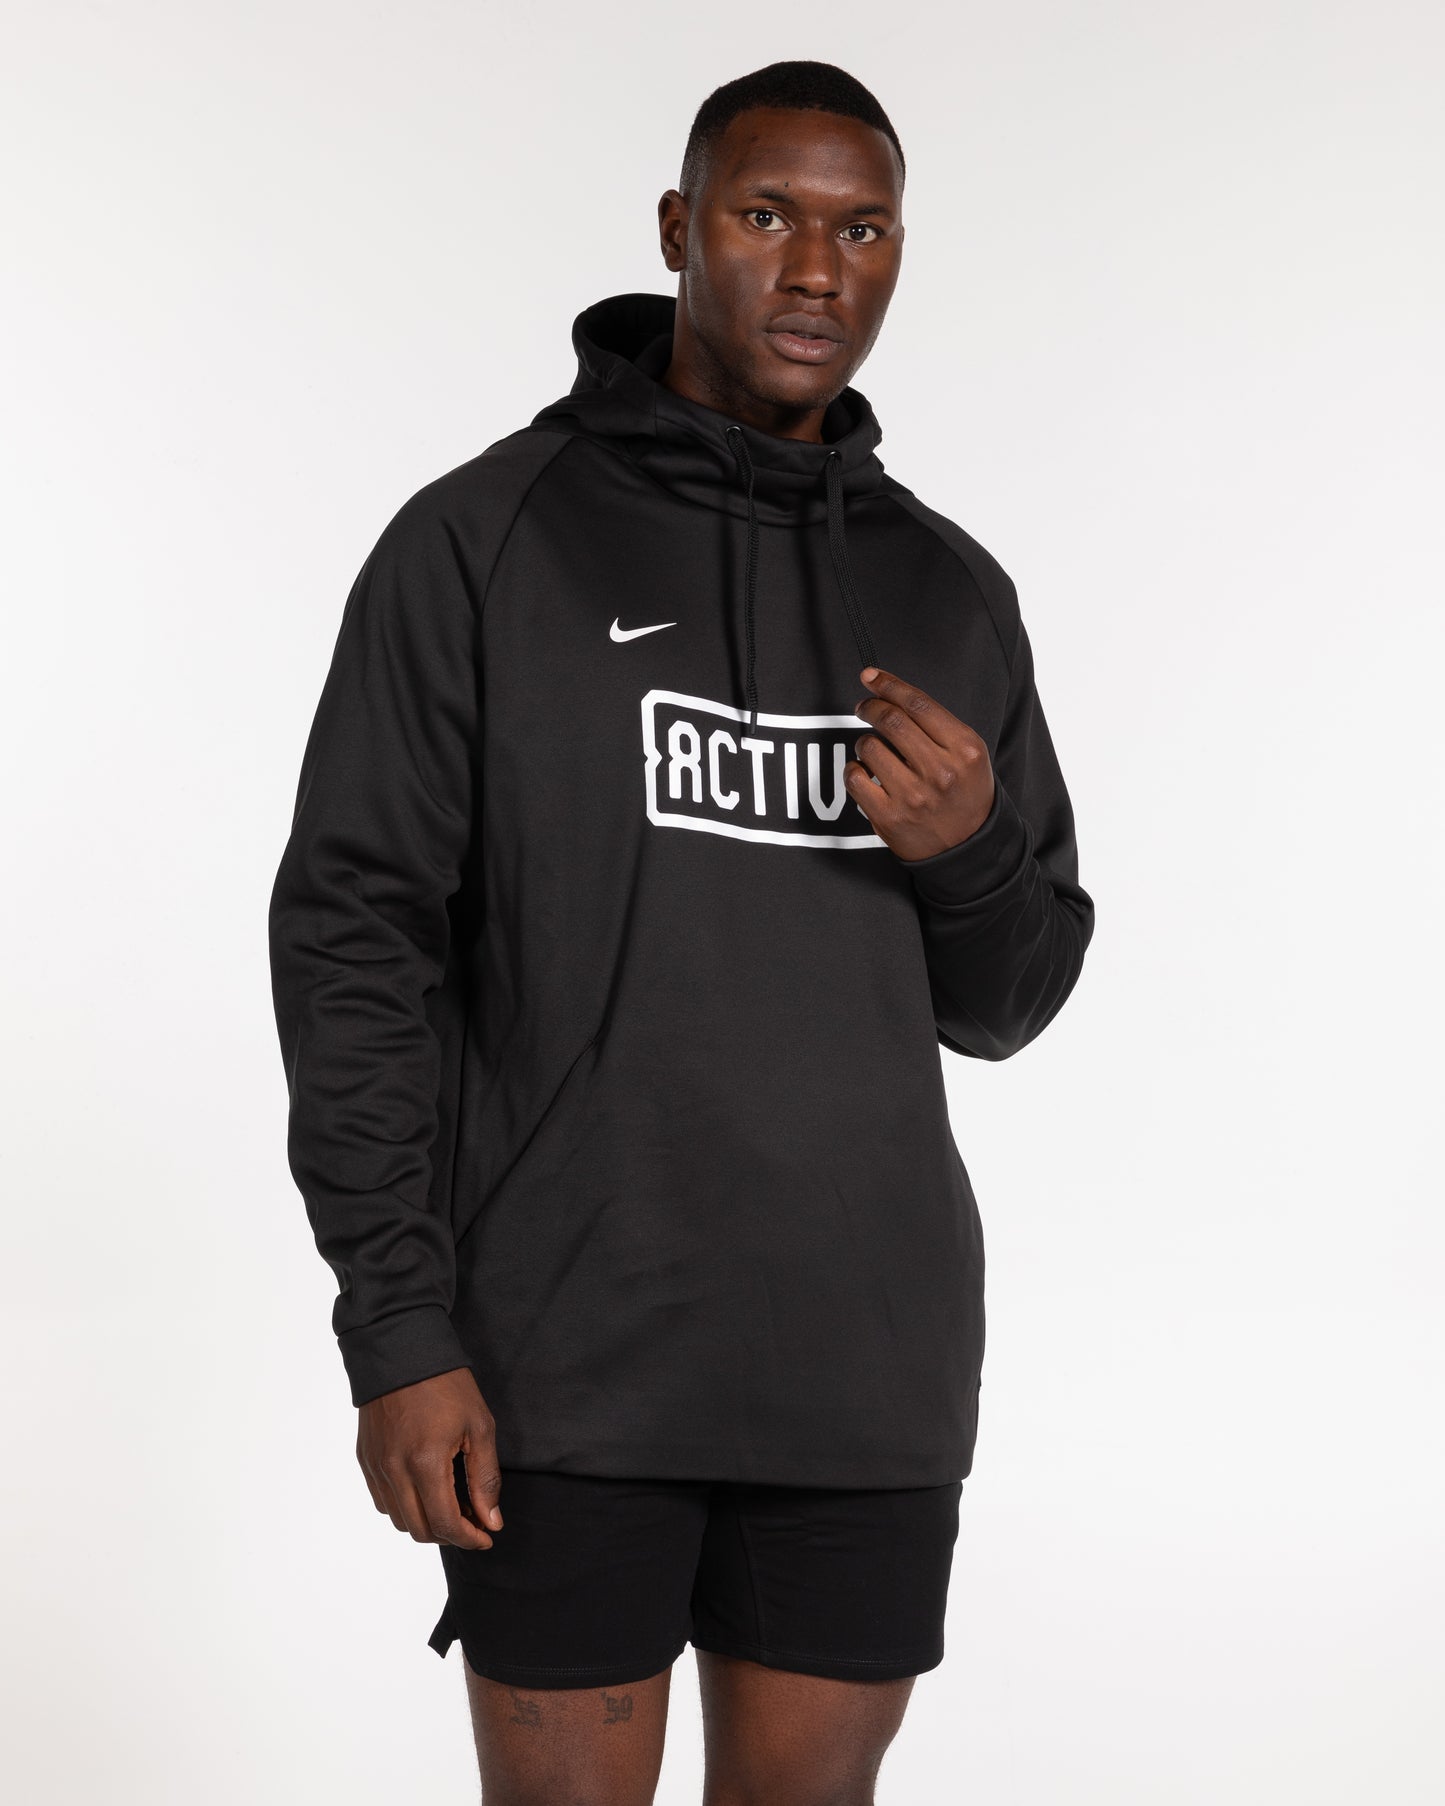 Activ8 NIKE THERMA Pullover Hoodie